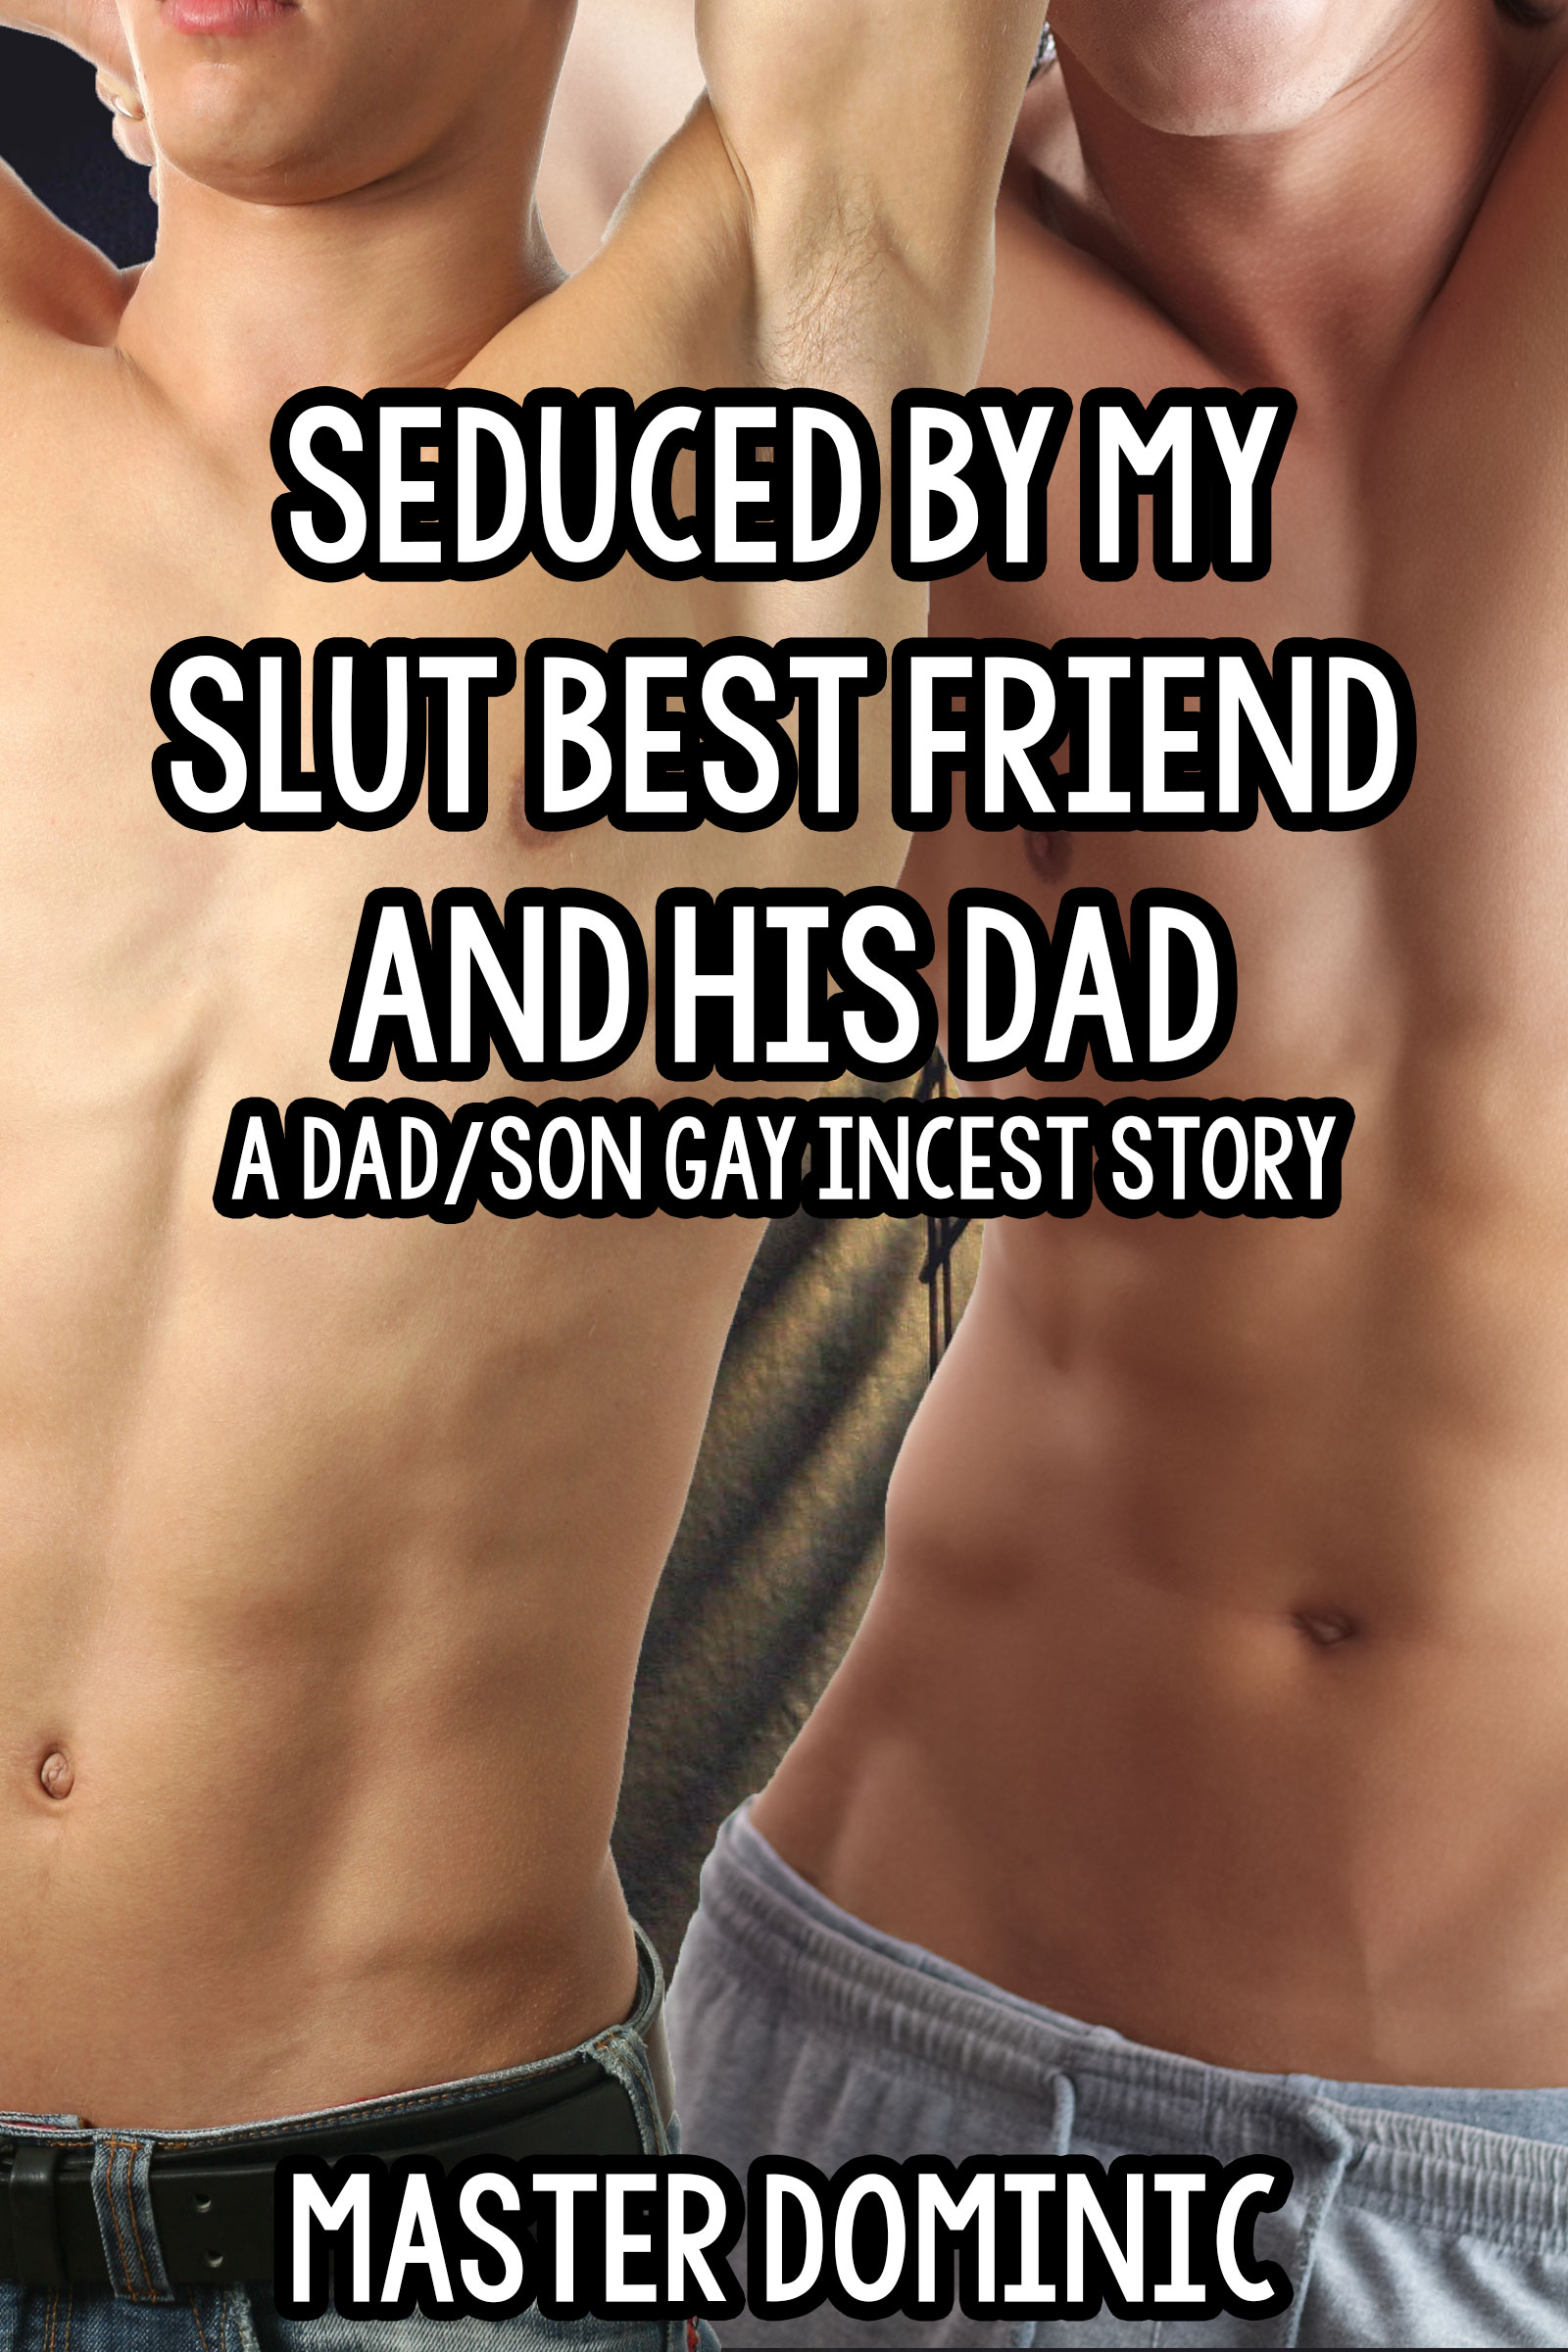 Seduced By My Slut Best Friend And His Dad A Dad/Son Gay Incest Story Dirty Gay Erotica from Master Dominic